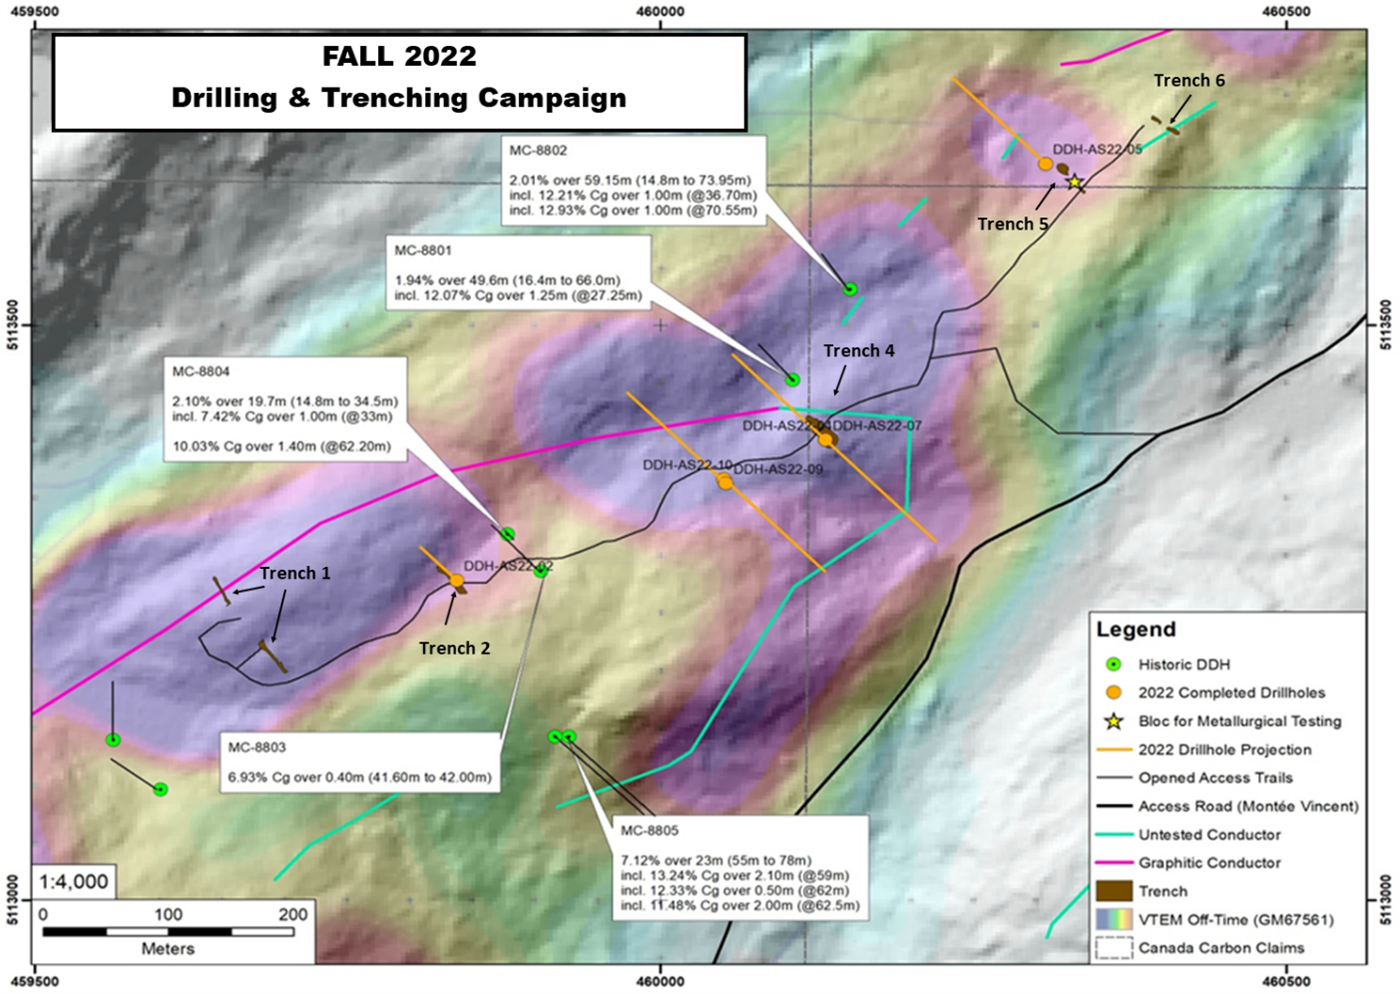 Historic Drill Holes plus Planned Trenches and Drill Holes in Fall 2022 Campaign